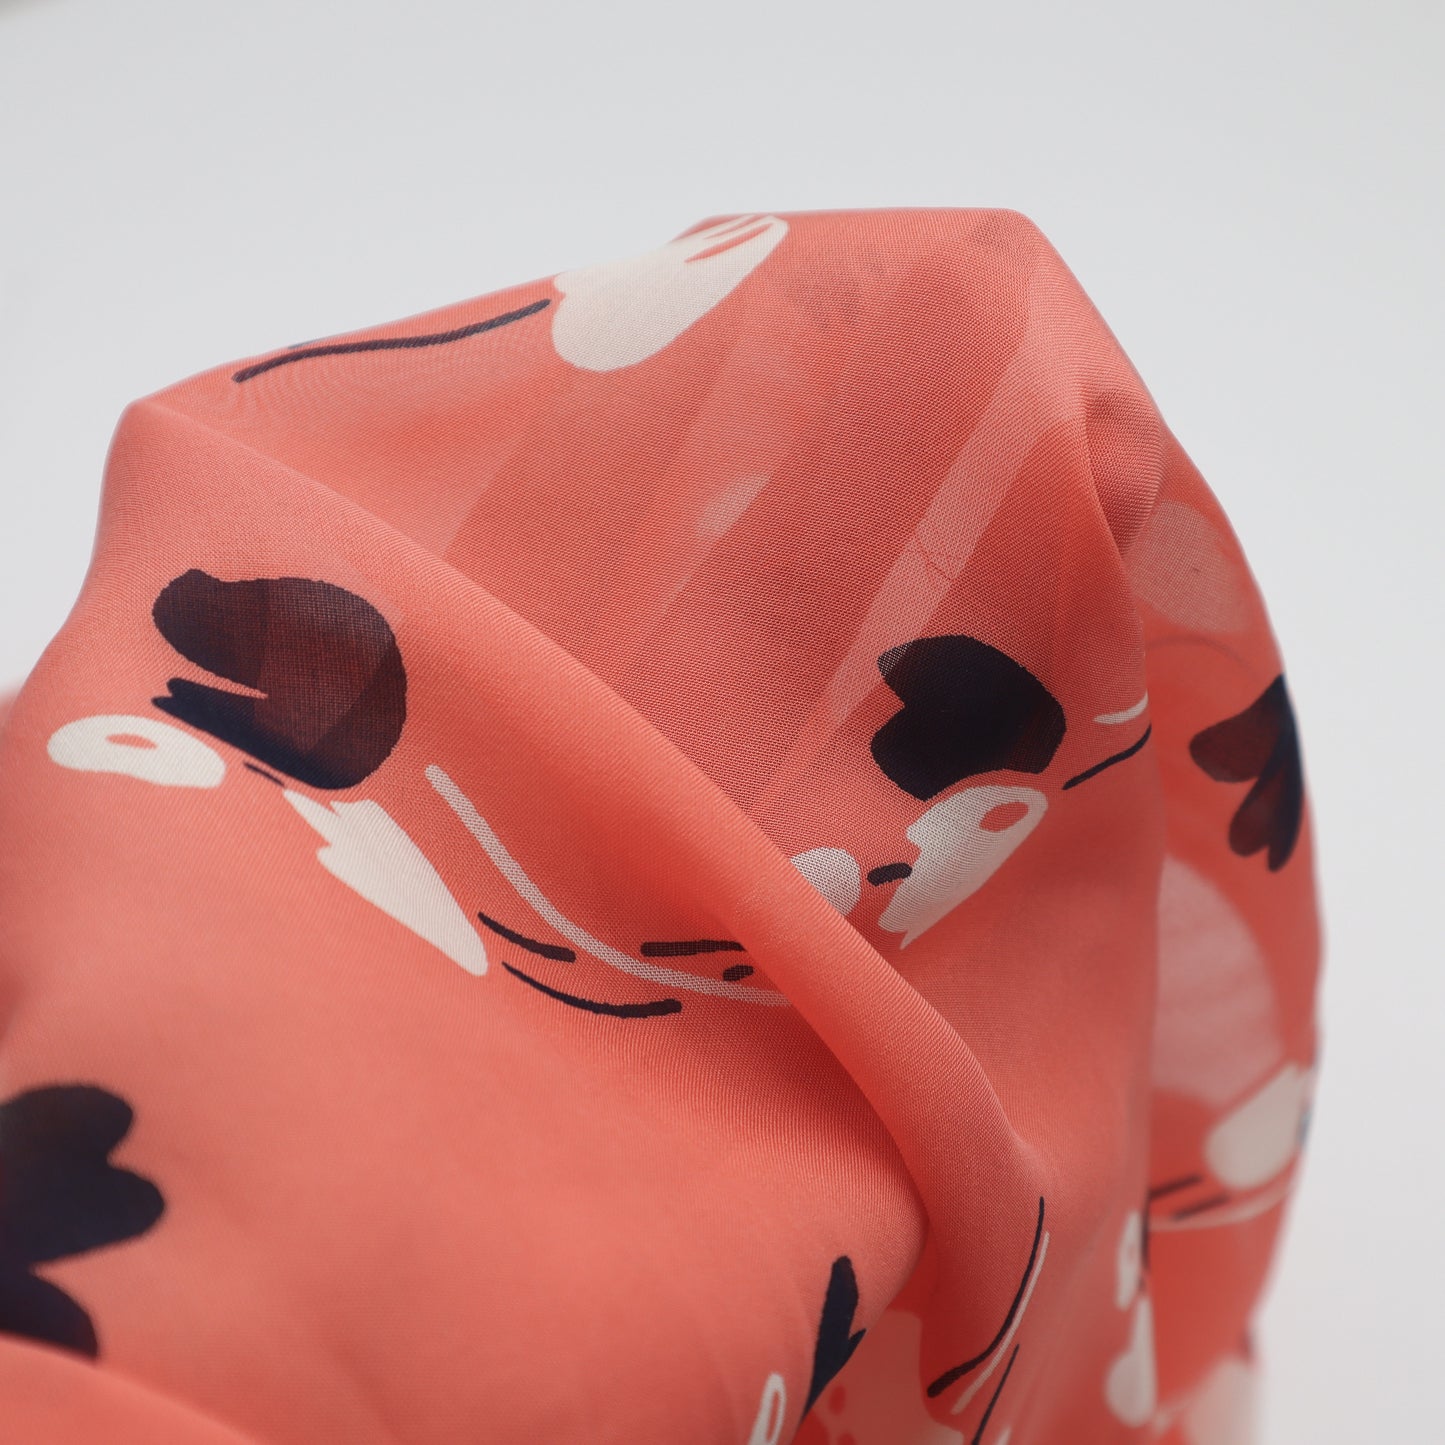 Lightweight Cotton Voile in Flushed Petal (Red)